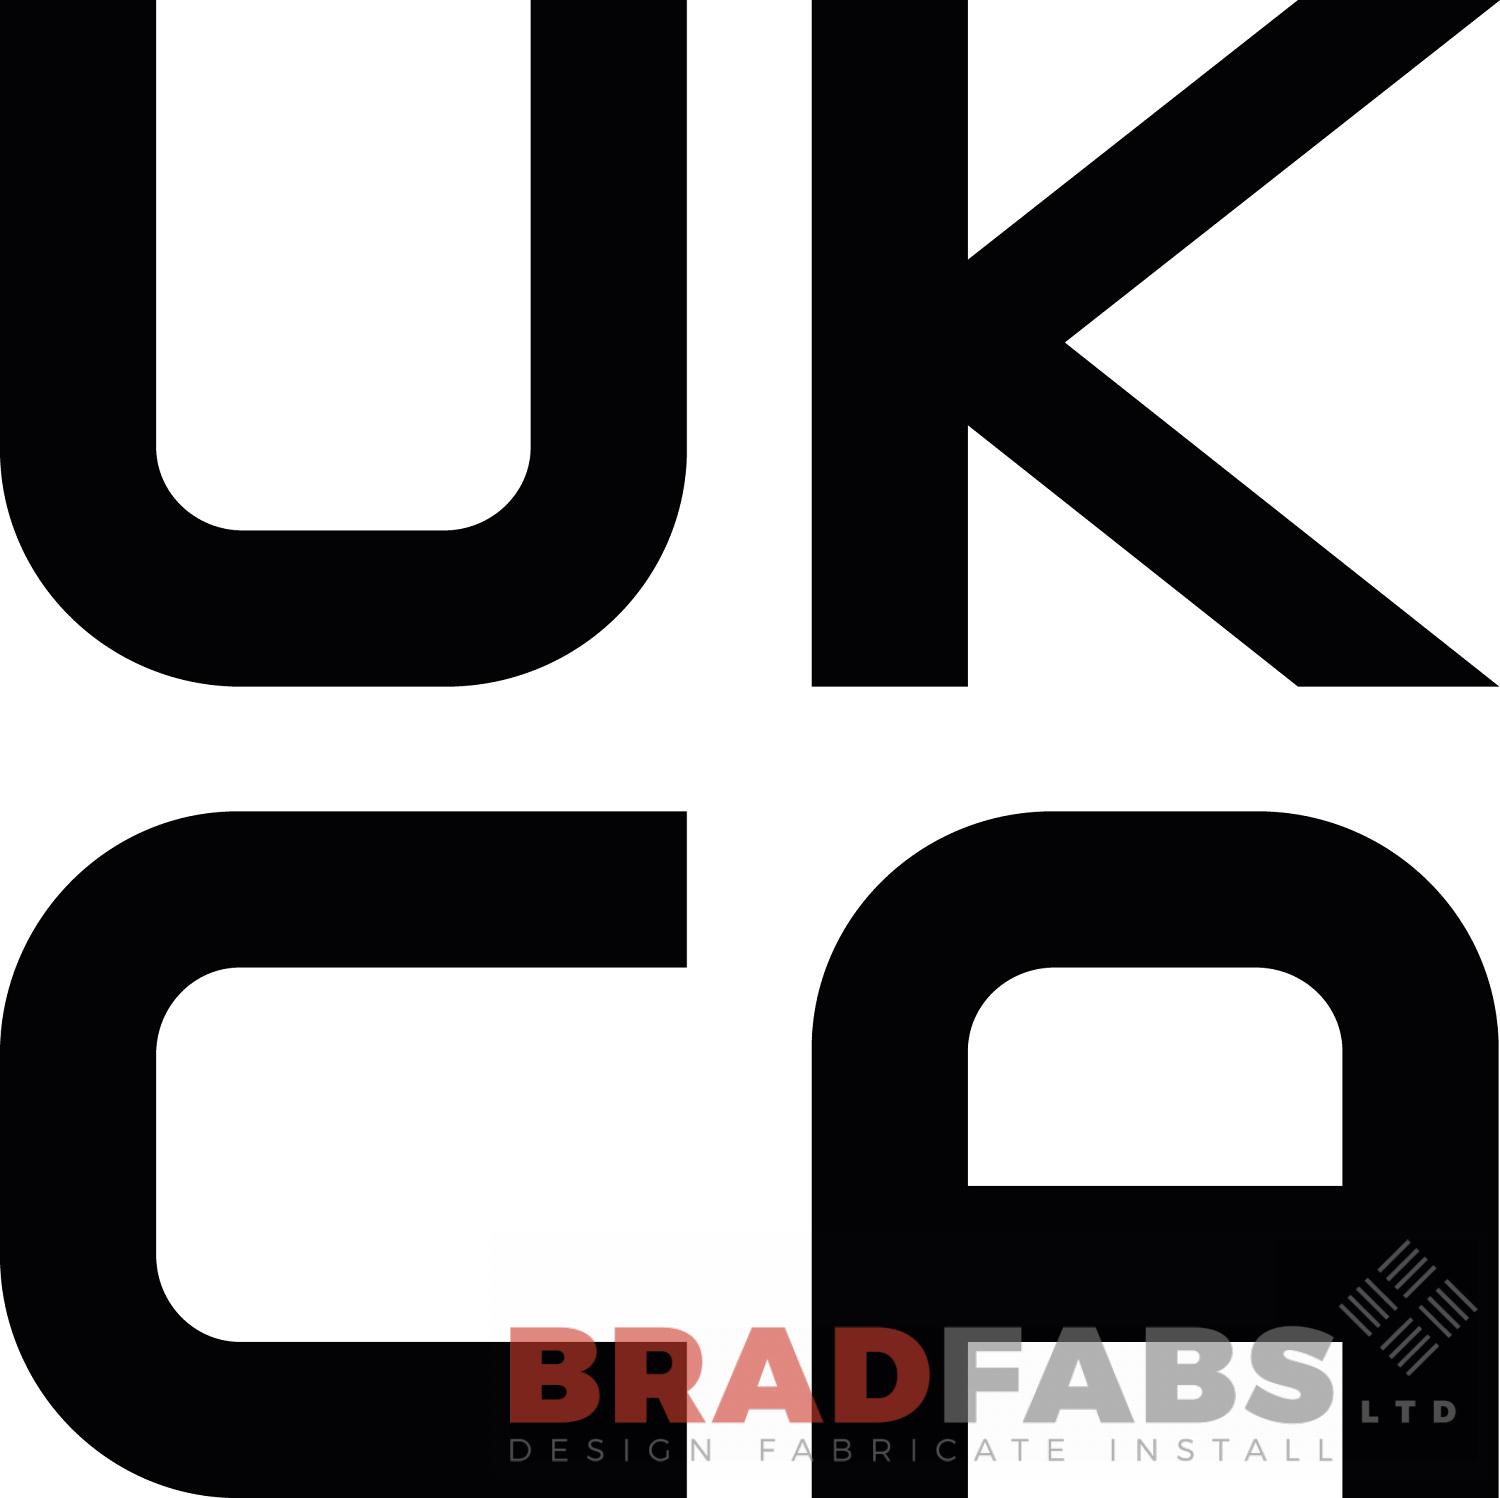 UKCA (formally known as CE Marking)